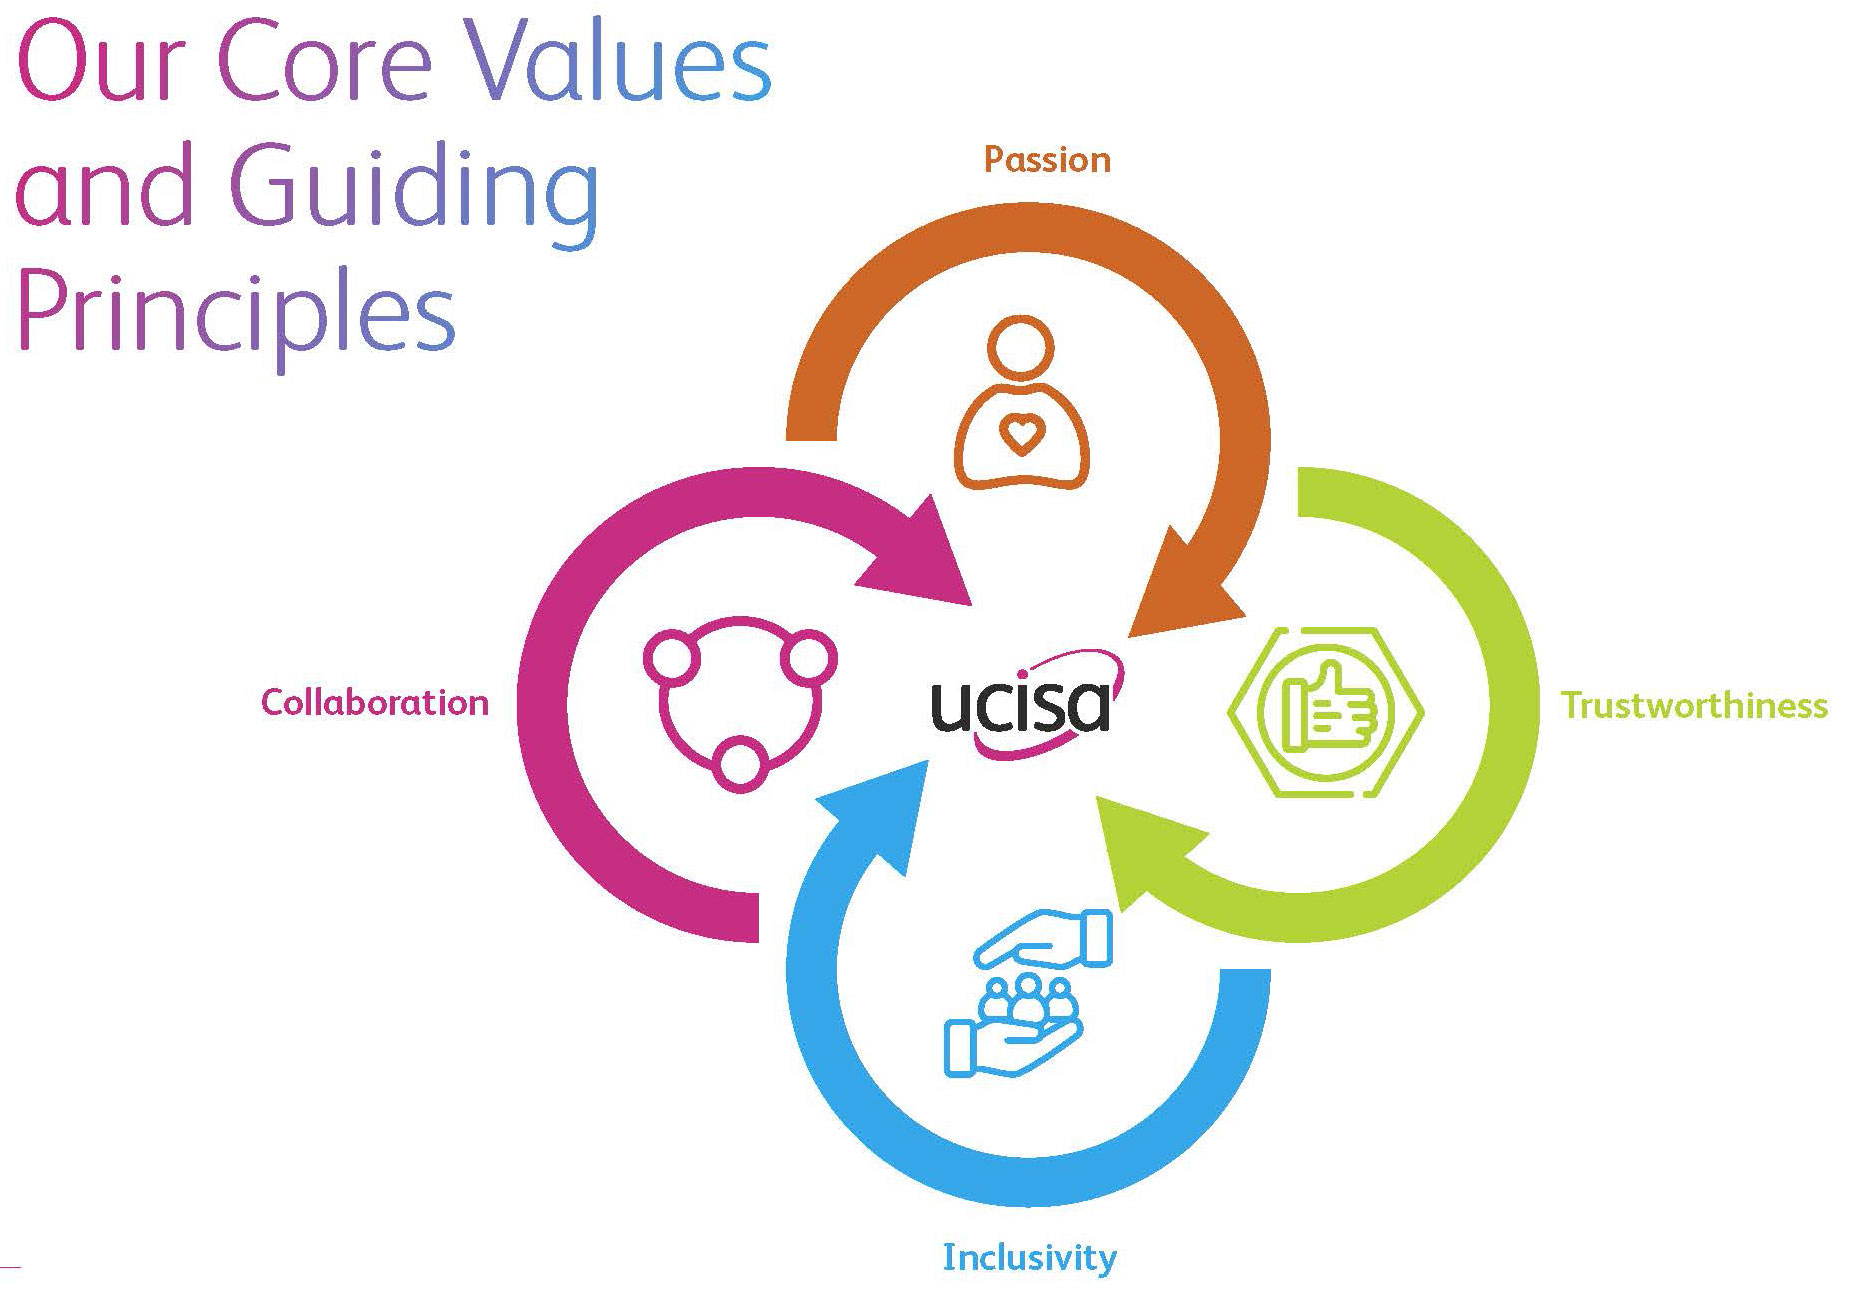 Our core values and guiding principles, passion,  trustworthiness, inclusivity and collaboration